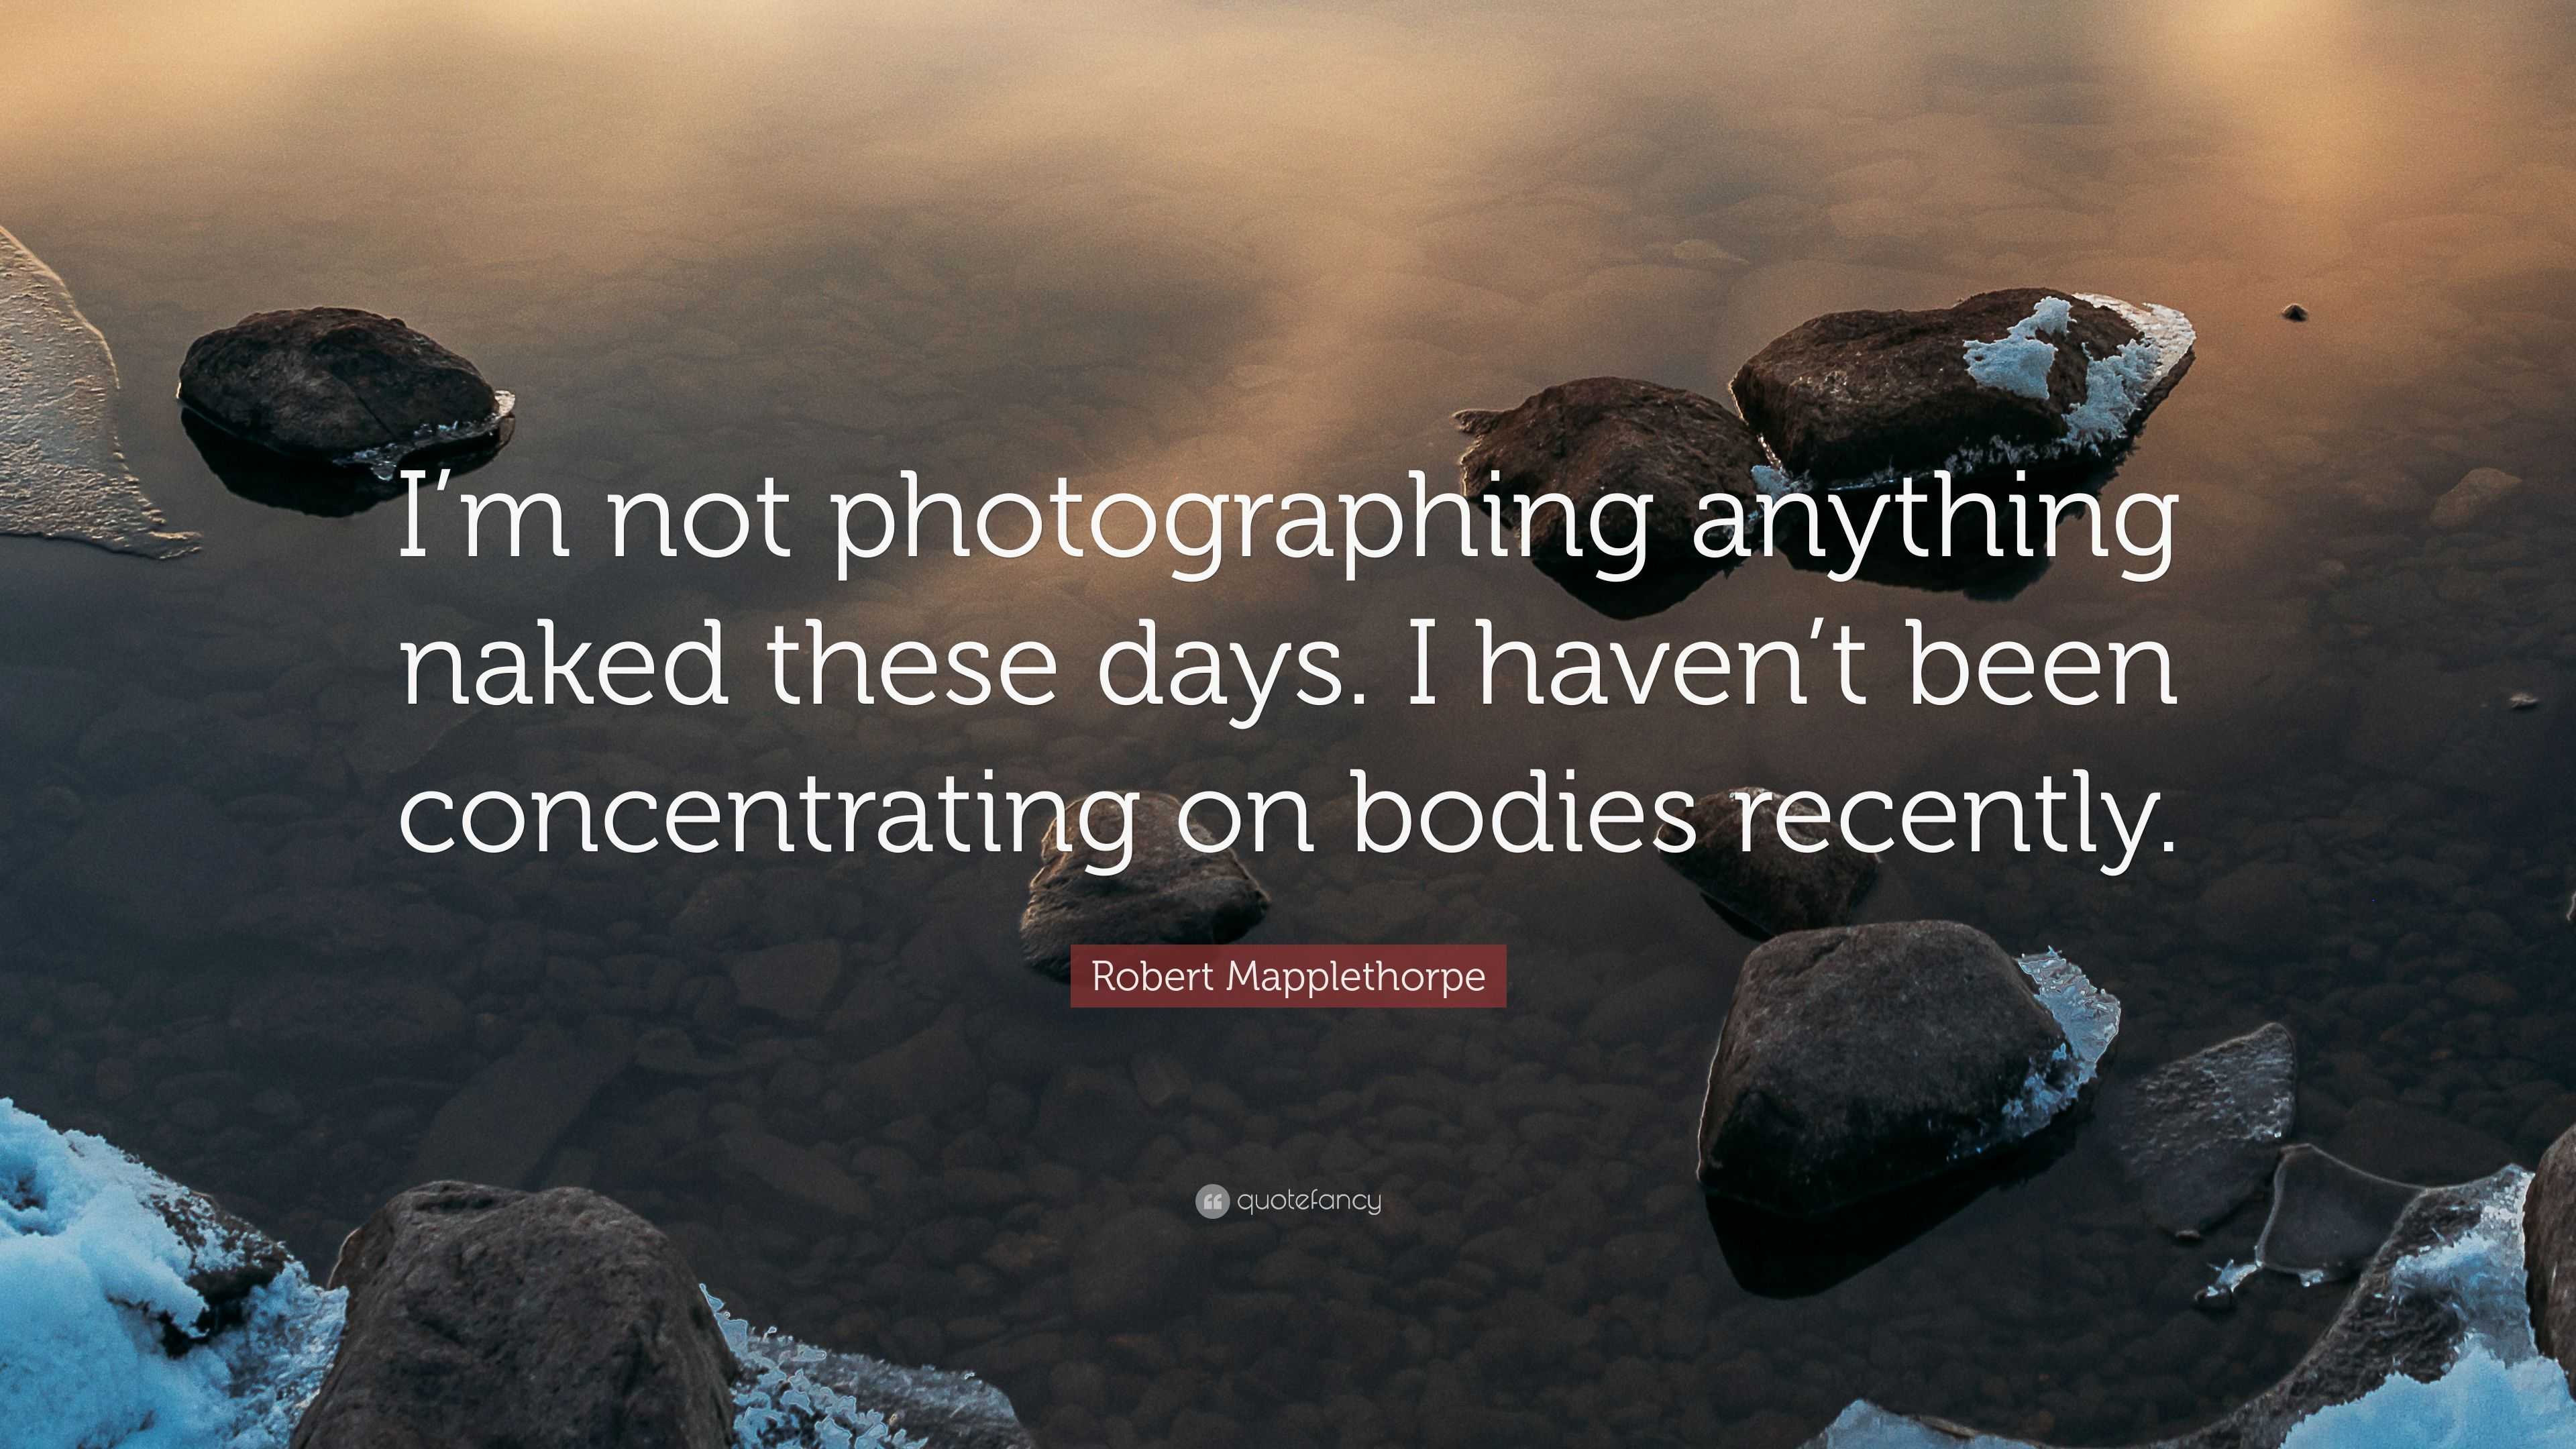 Robert Mapplethorpe Quote Im Not Photographing Anything Naked These Days I Havent Been